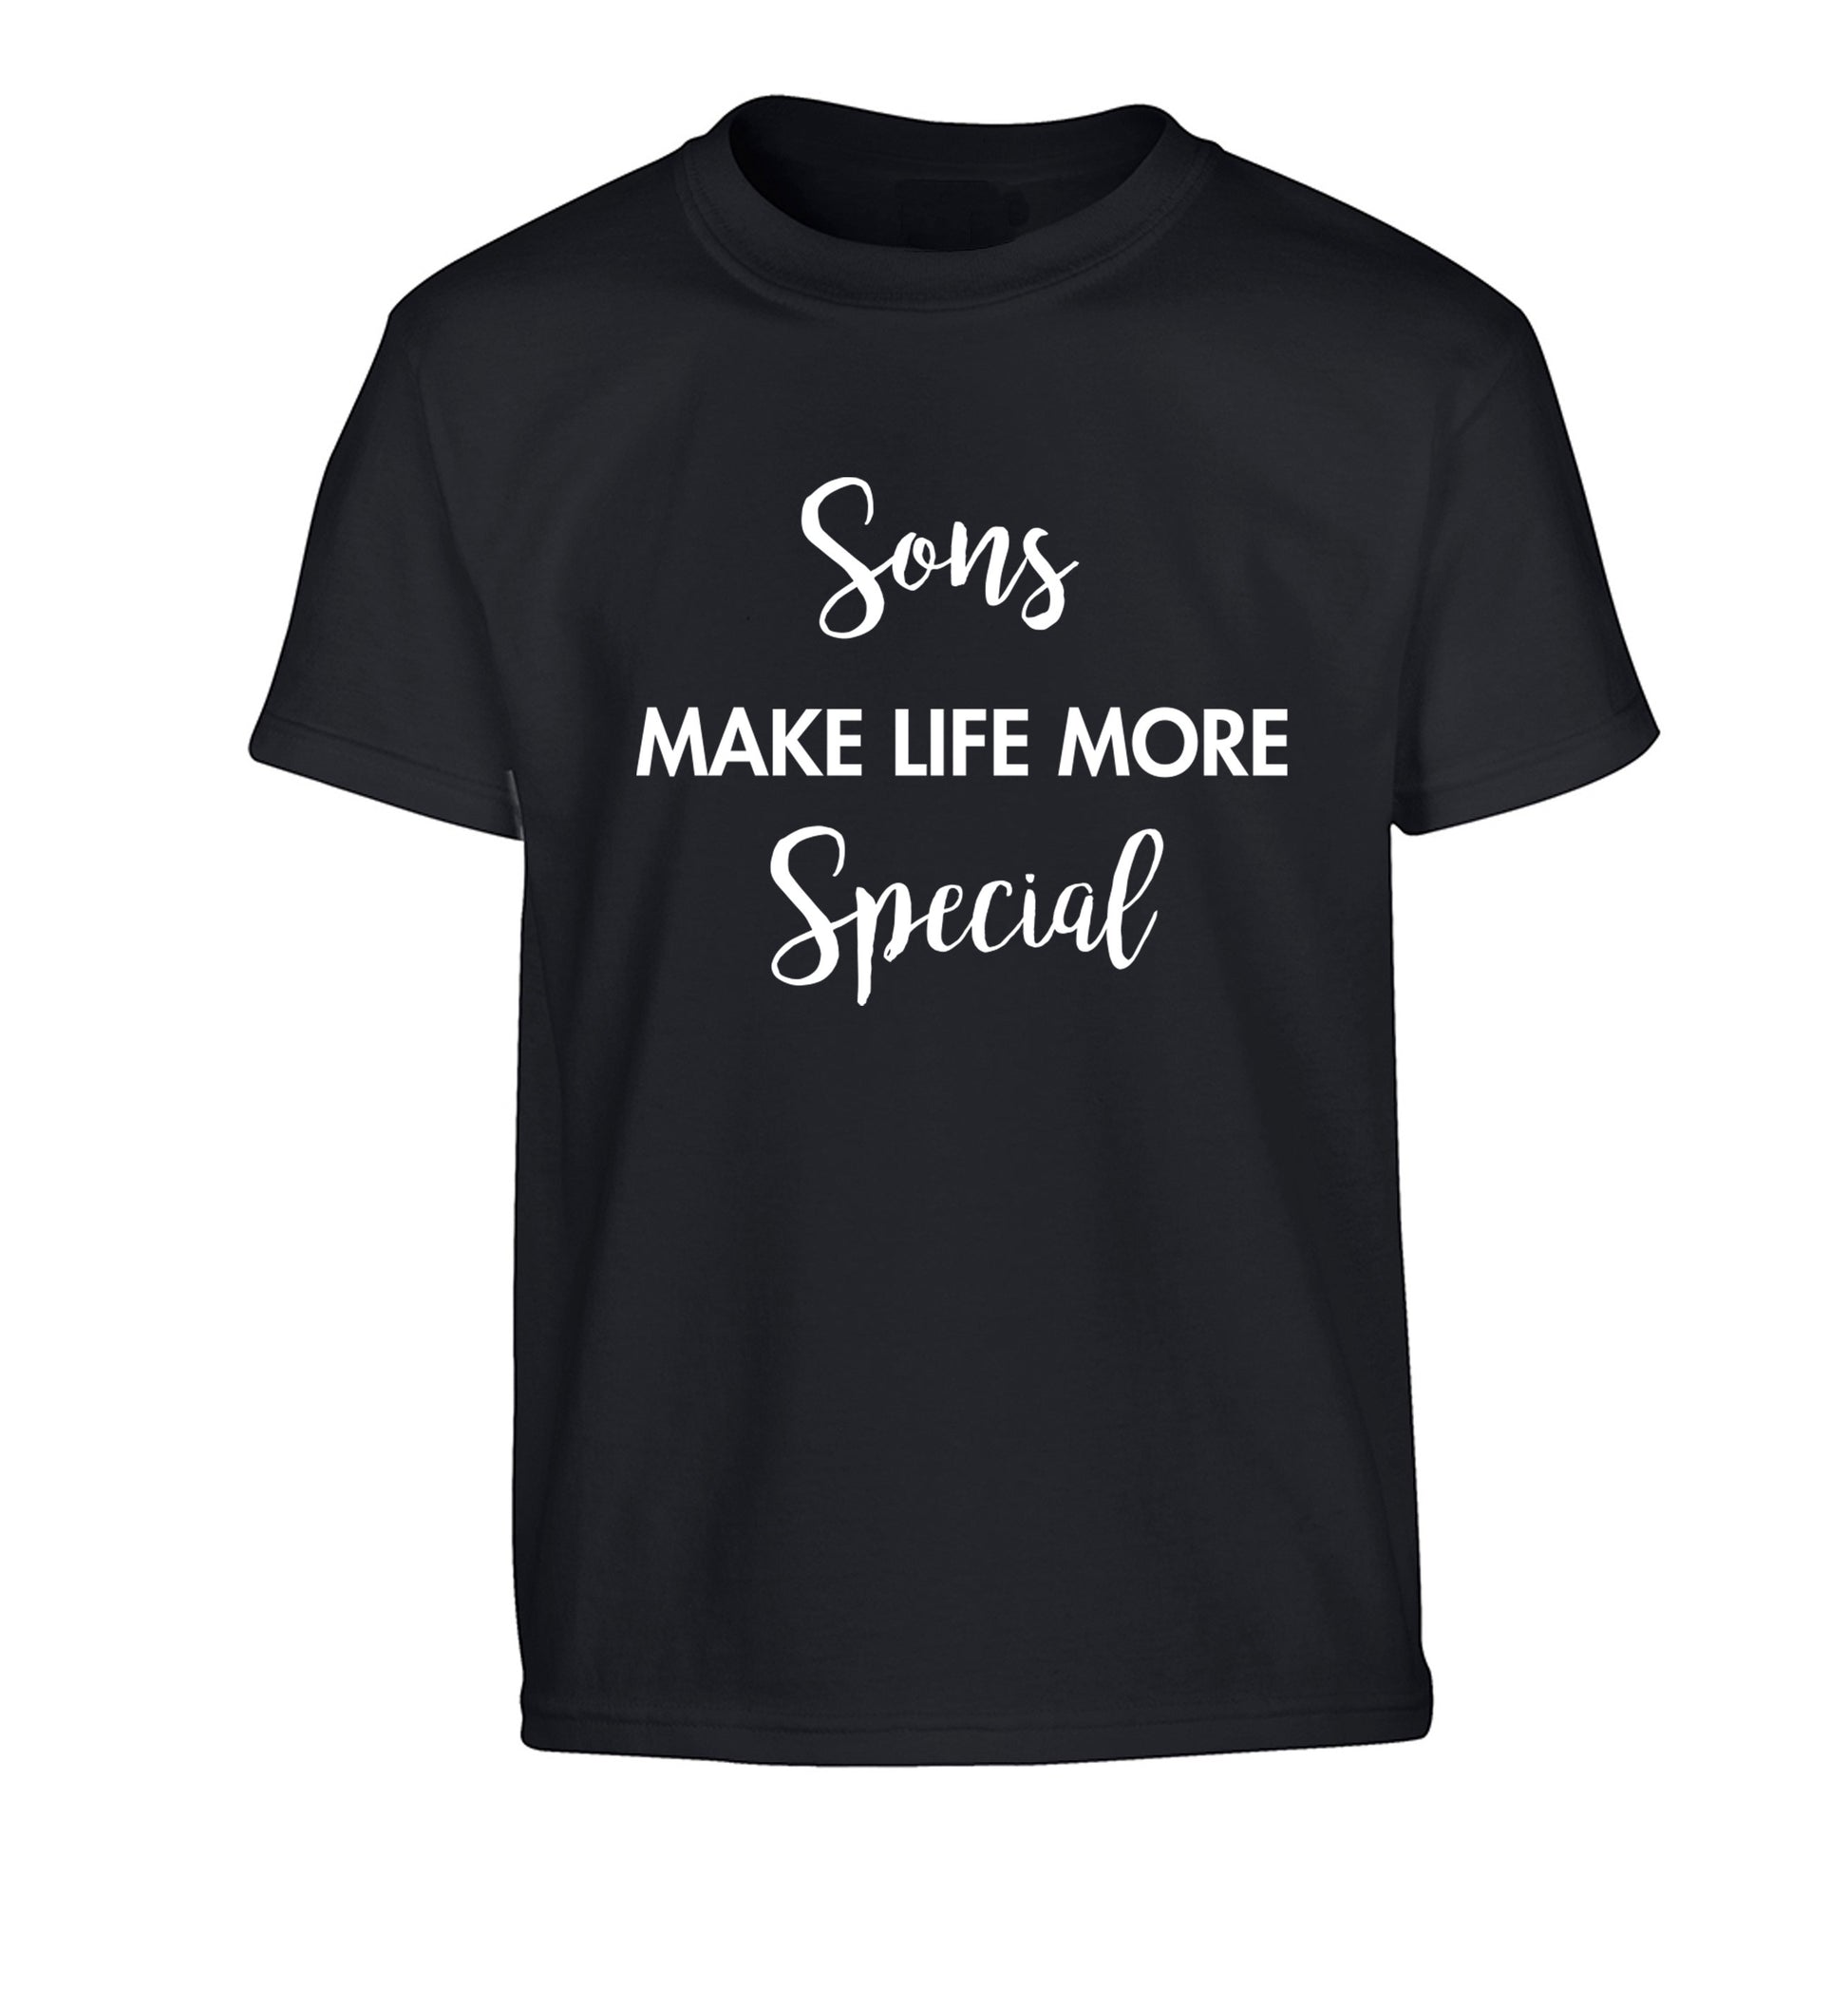 Sons make life more special Children's black Tshirt 12-14 Years